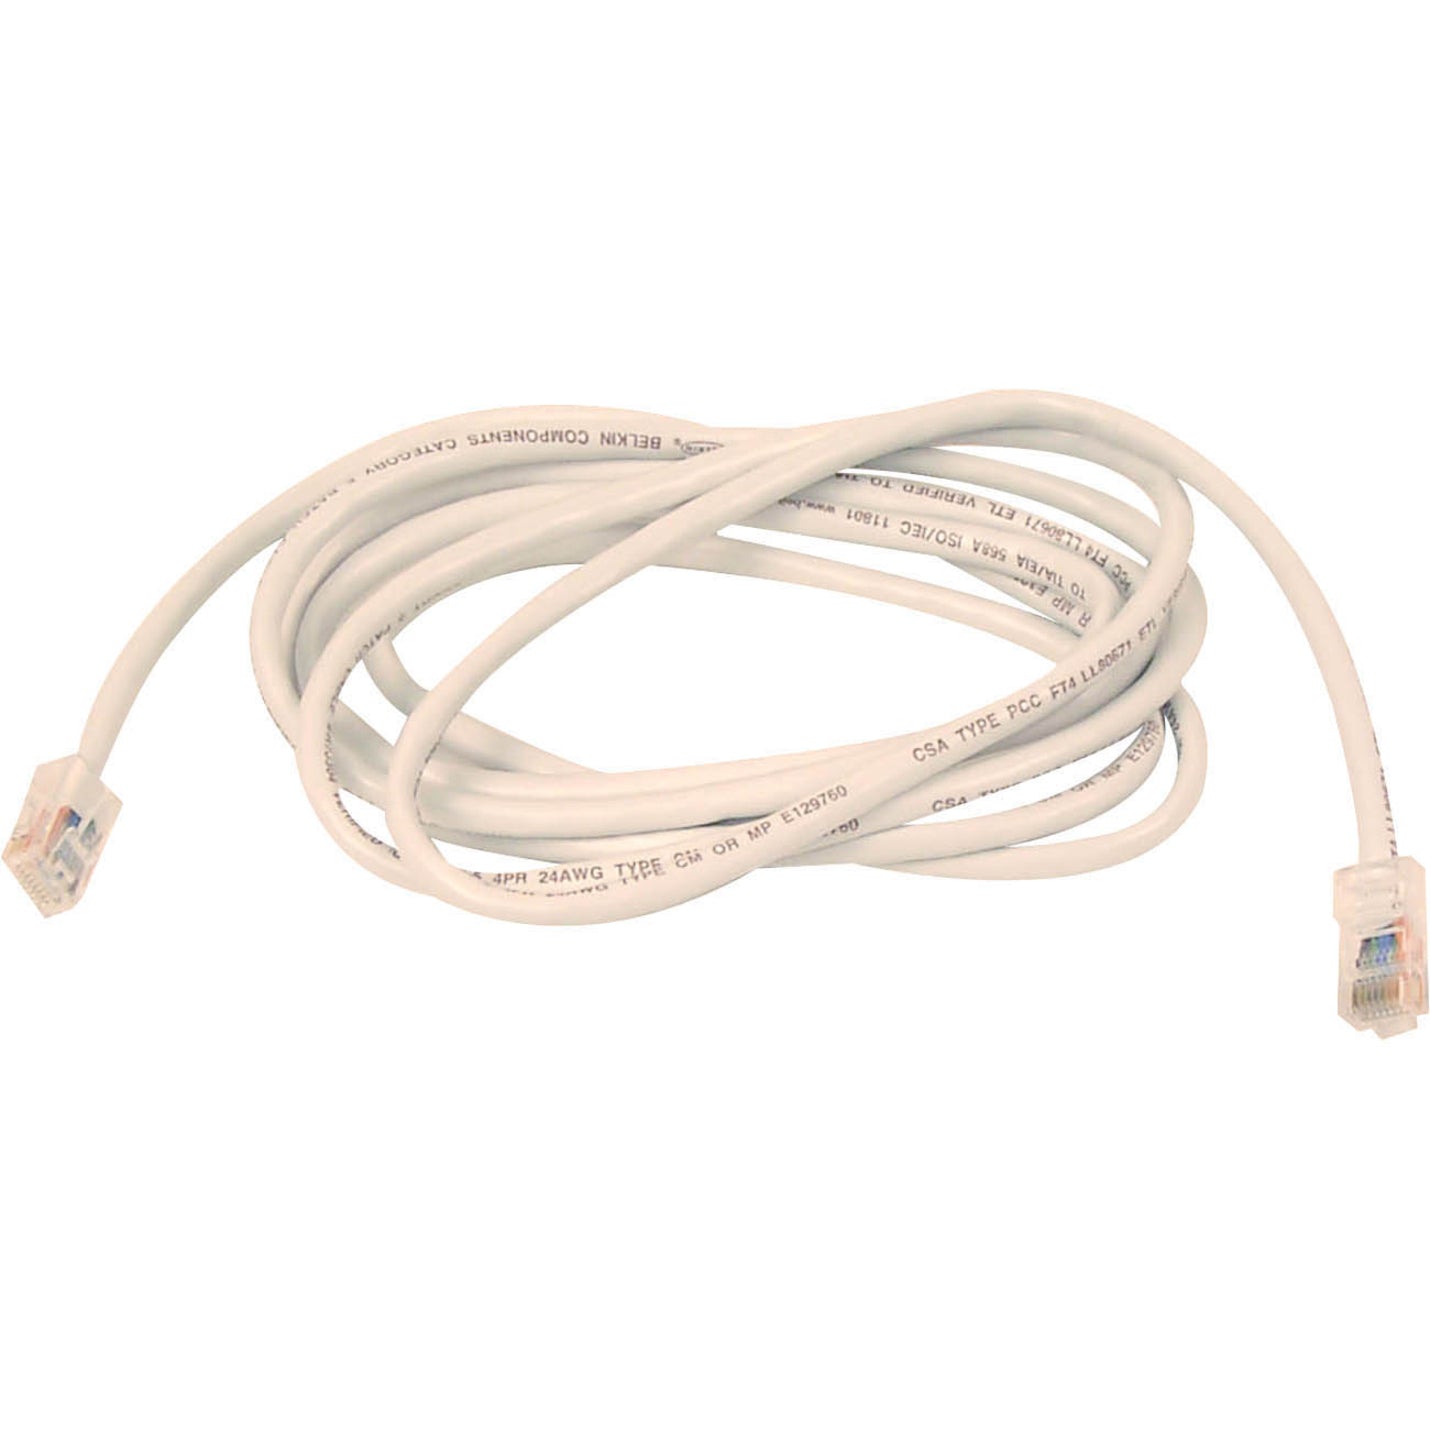 Belkin A3L791-25-WHT Cat5e Patch Cable, 25 ft, PowerSum Tested, EIA/TIA-568 Certified